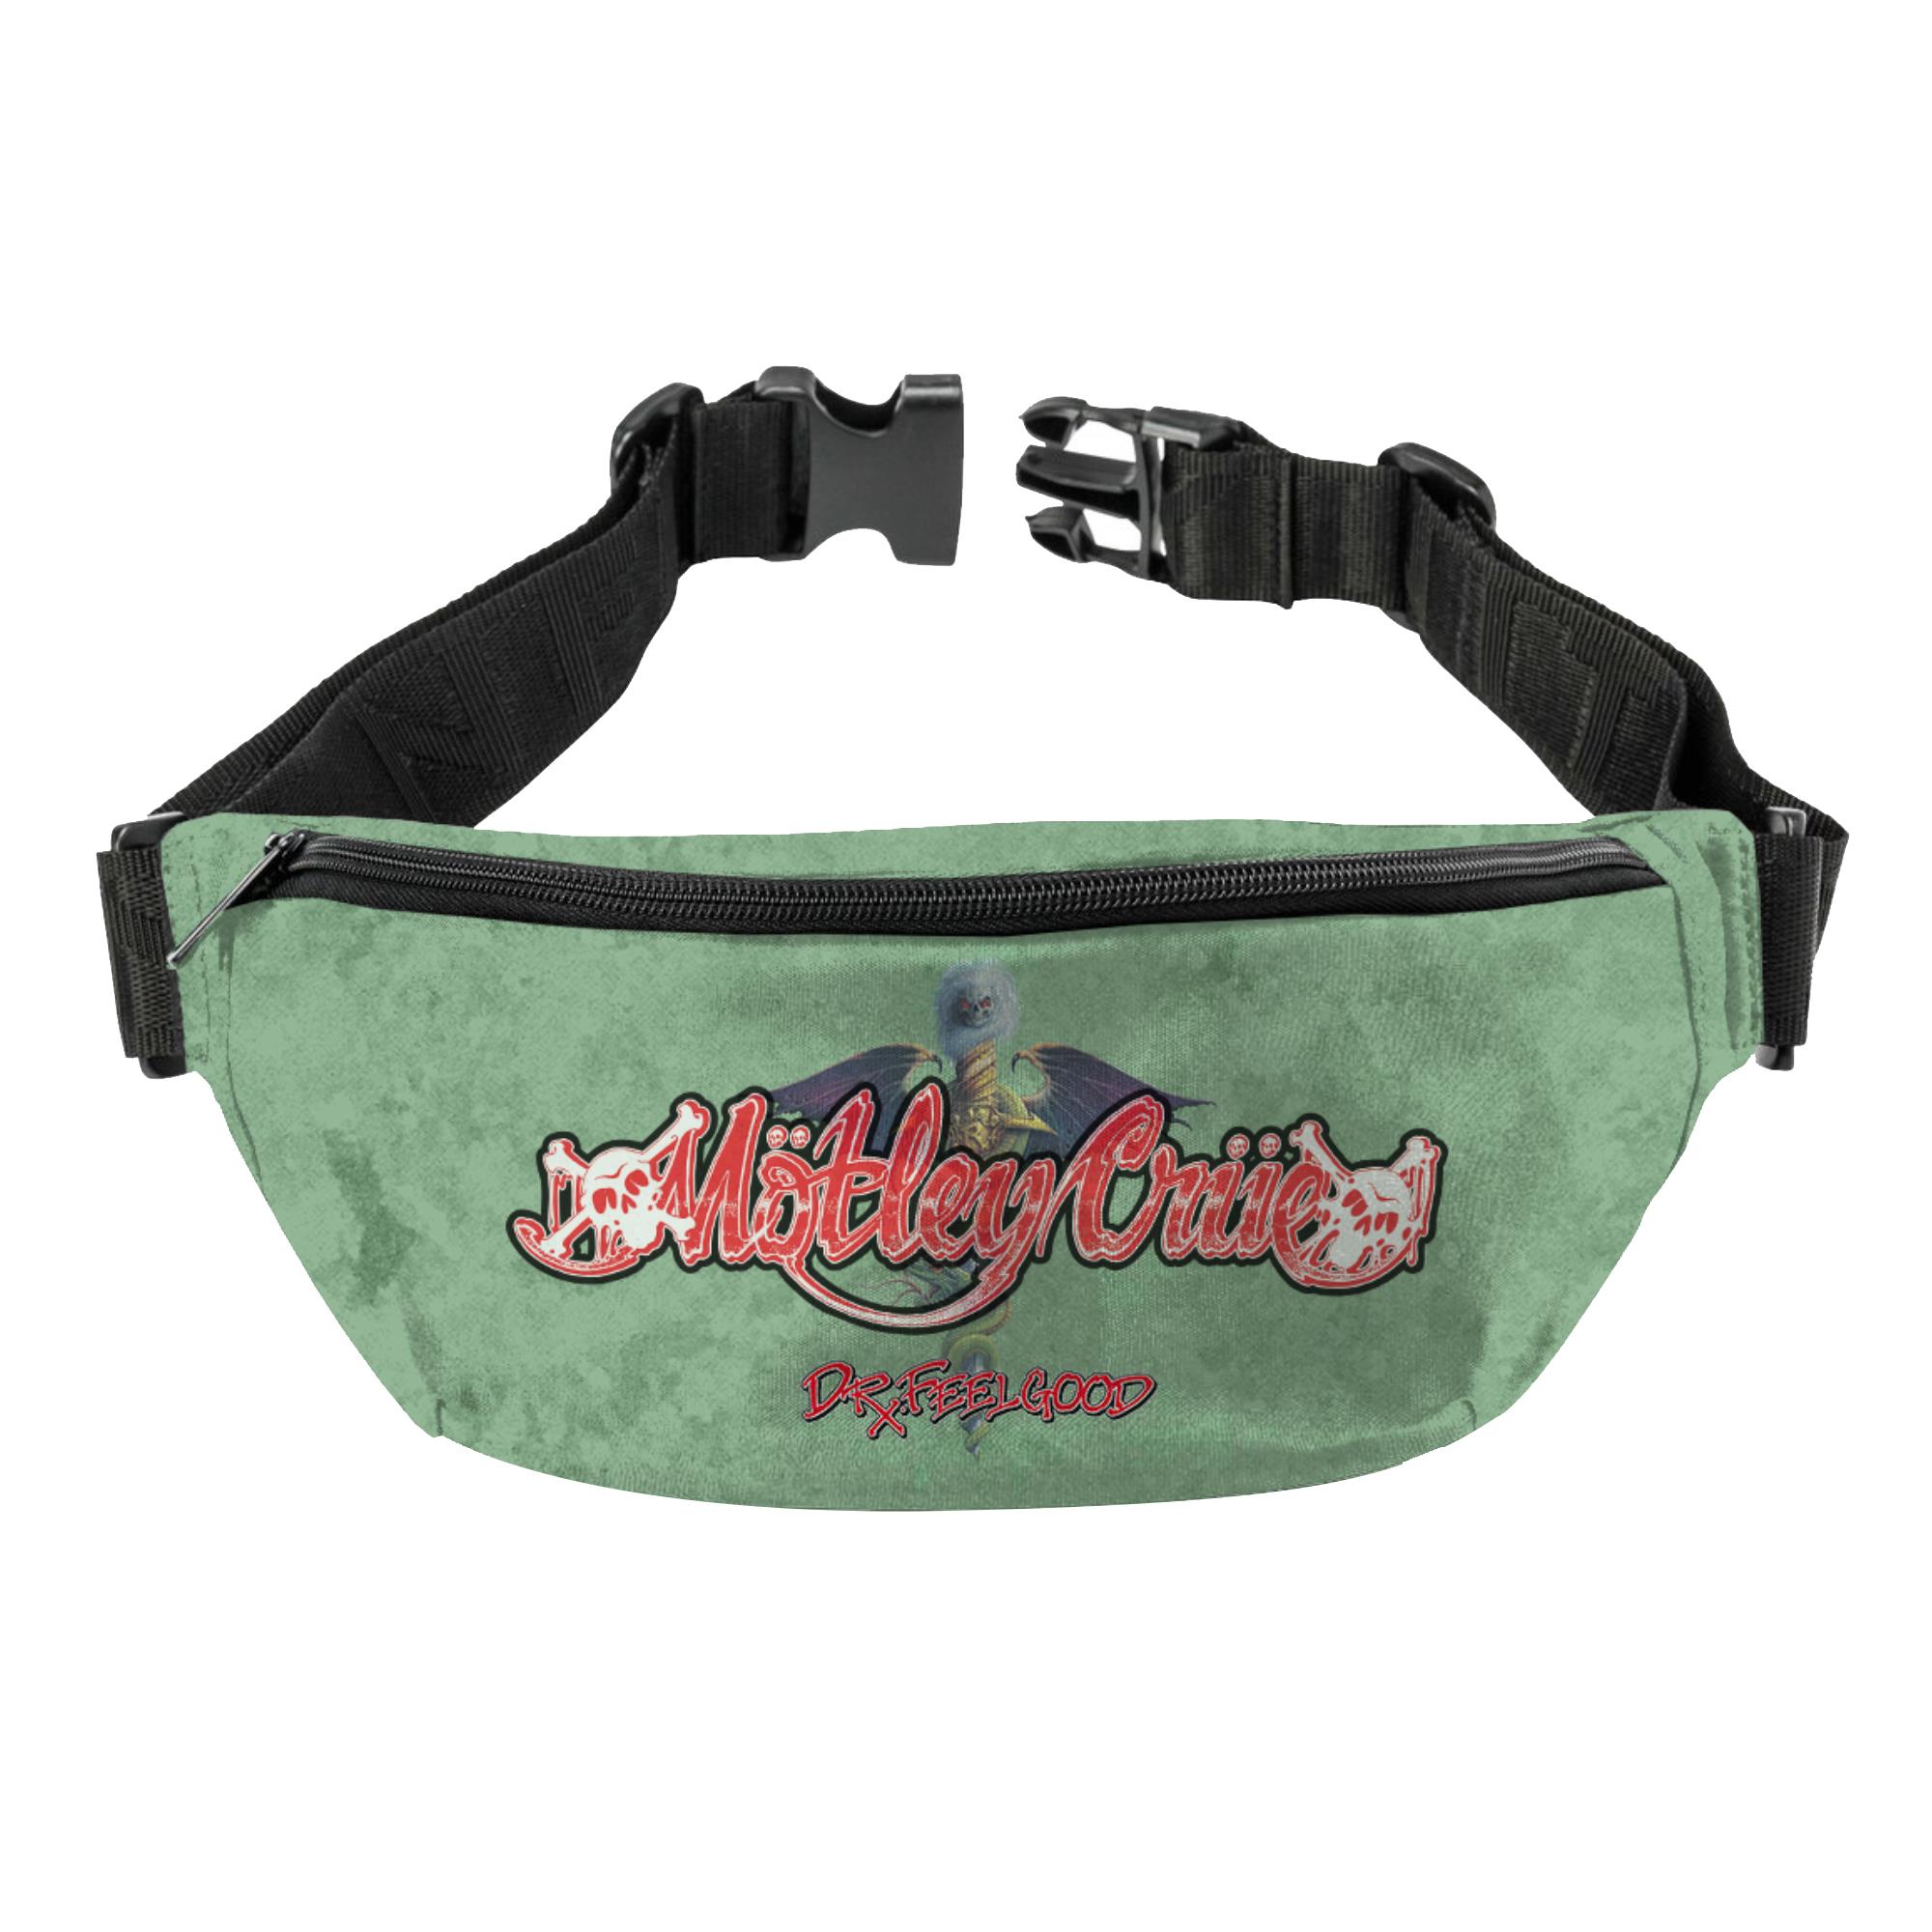 Dr. Feelgood Fanny Pack